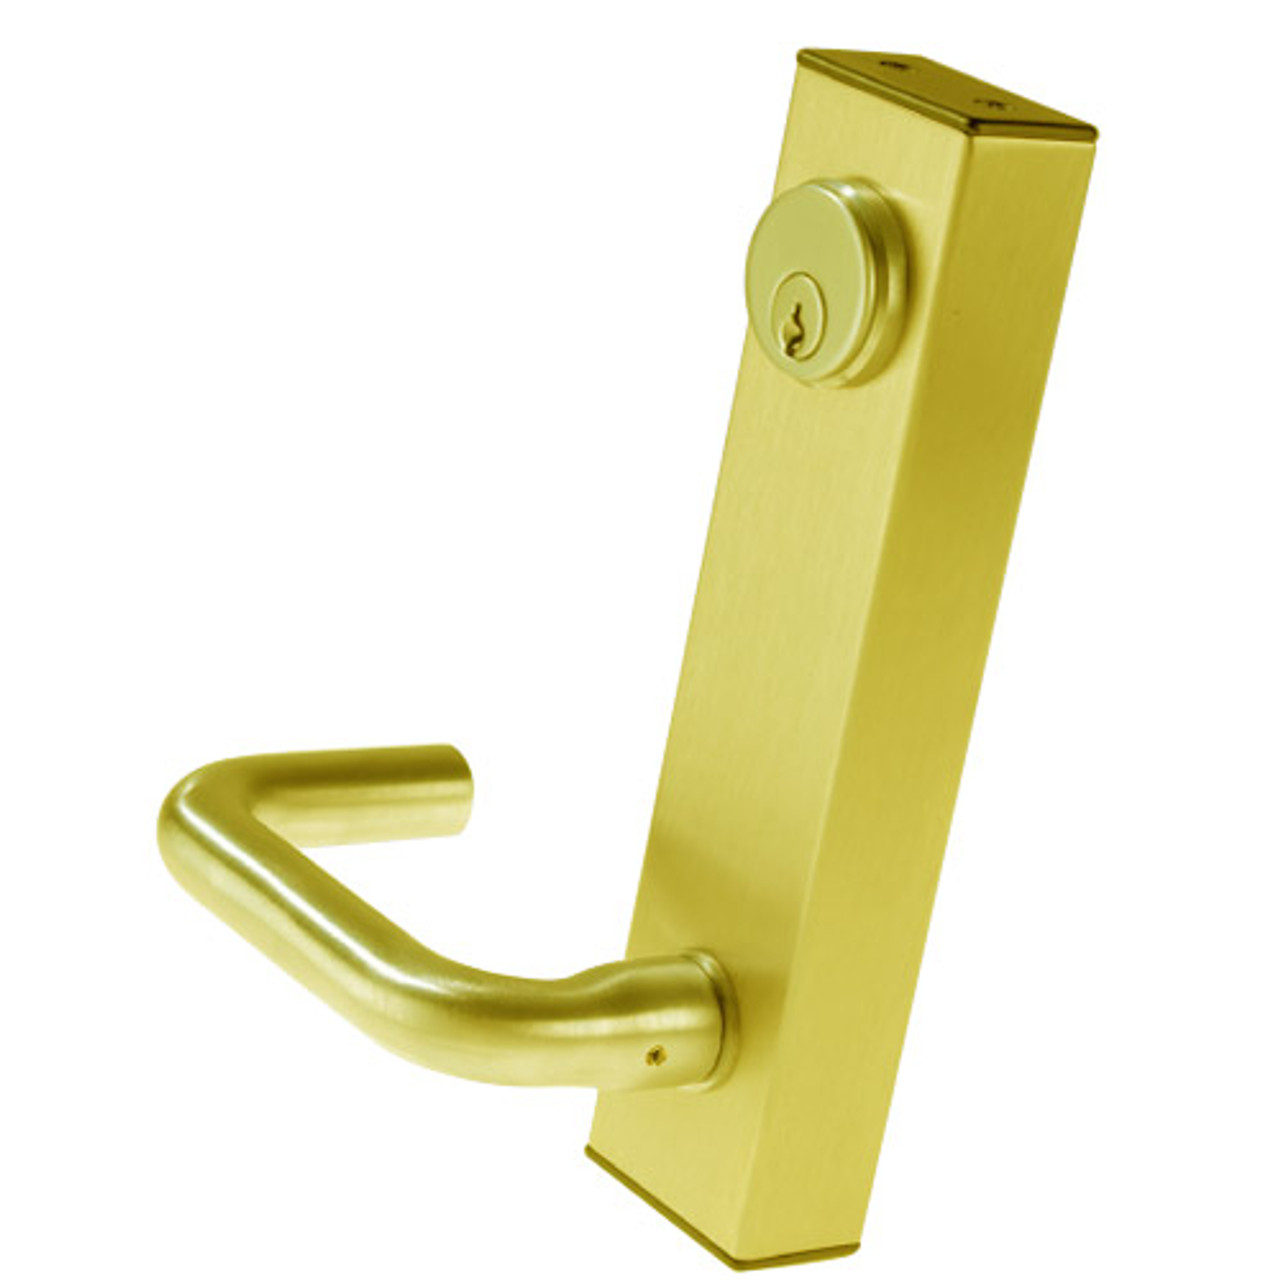 3080E-02-0-91-35 US3 Adams Rite Electrified Entry Trim with Round Lever in Bright Brass Finish